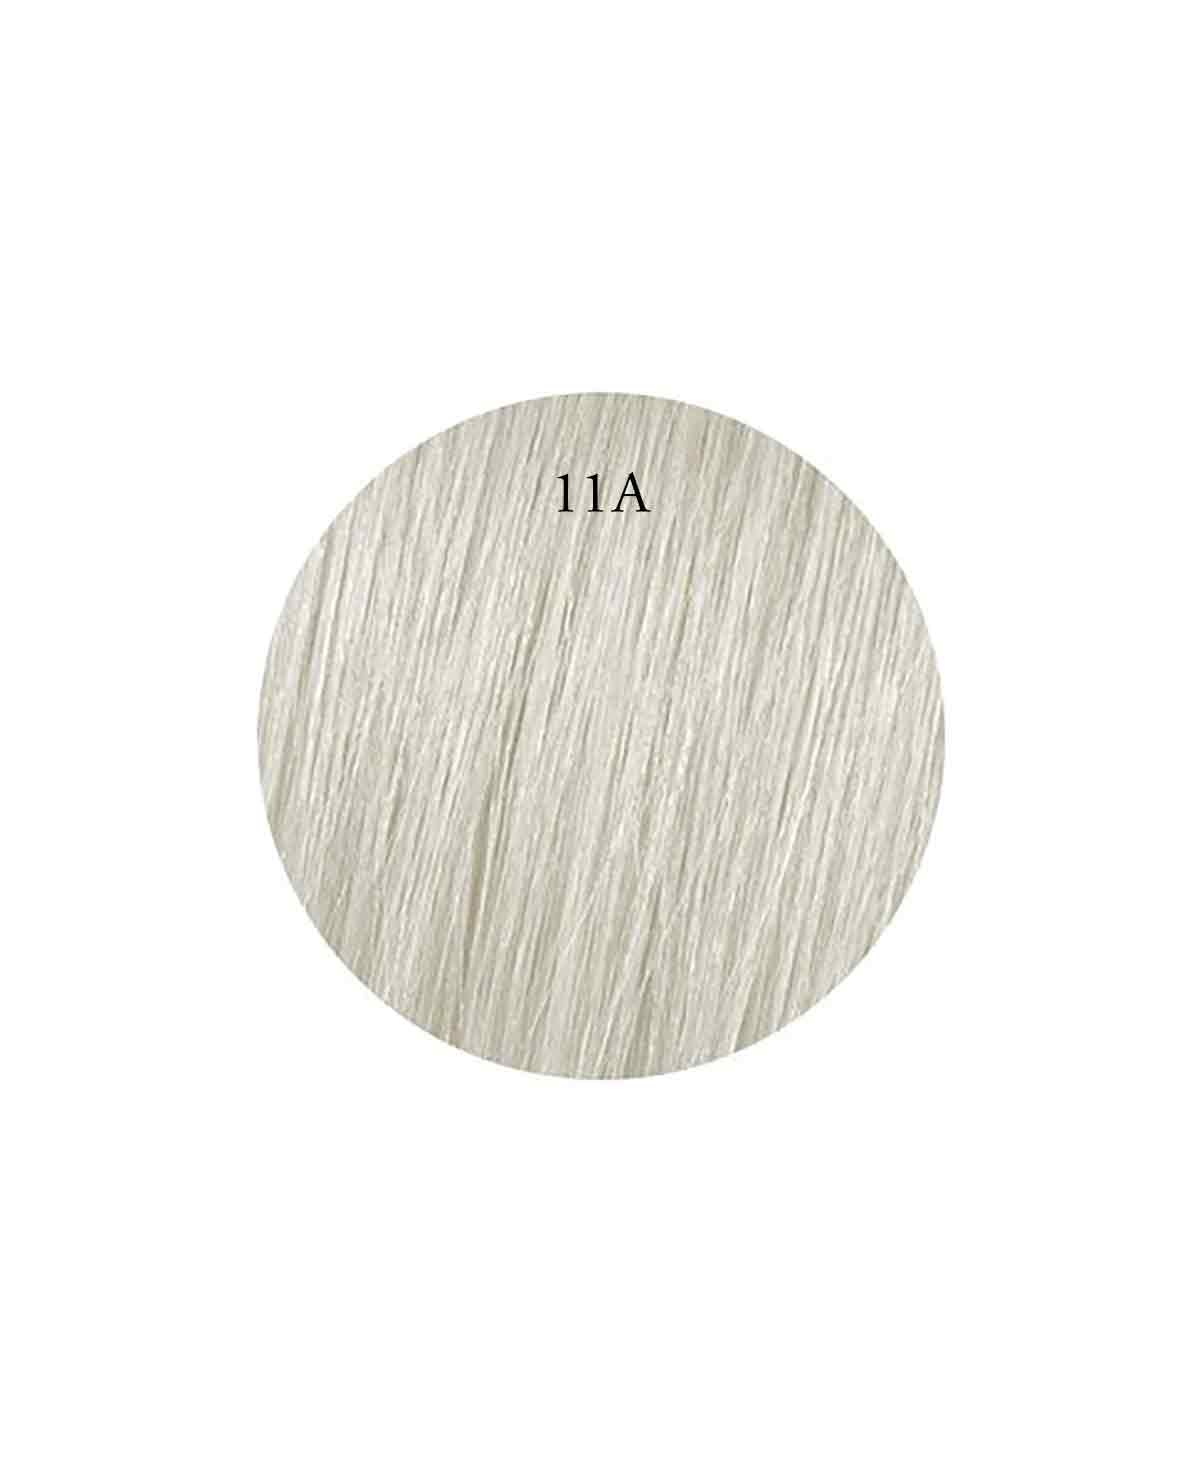 45-50cm (20") TAPE EXTENSIONS - ICE BLONDE - 11A